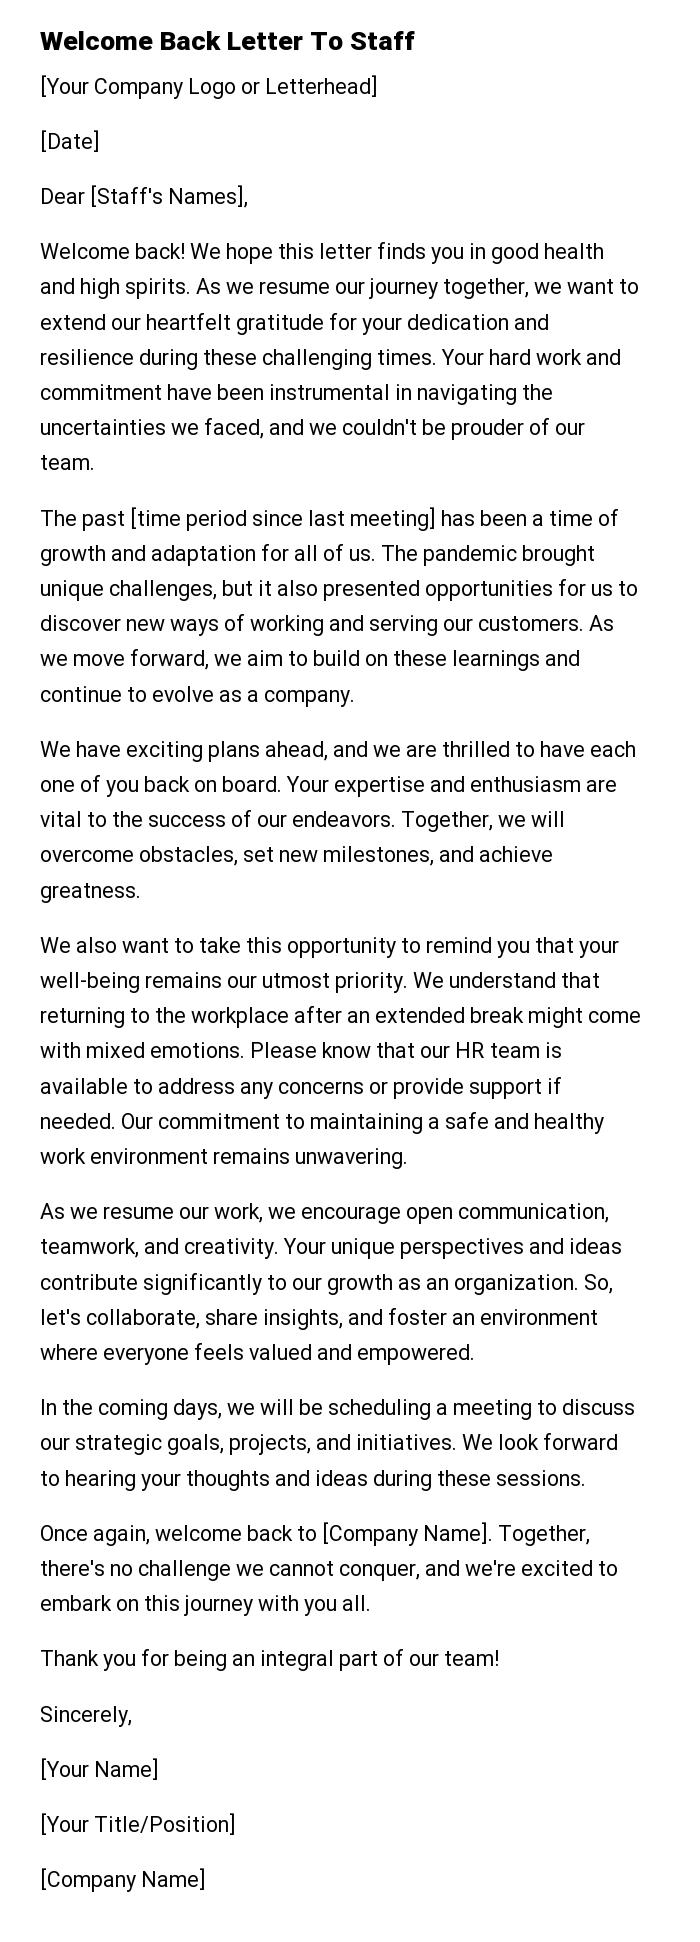 Welcome Back Letter To Staff